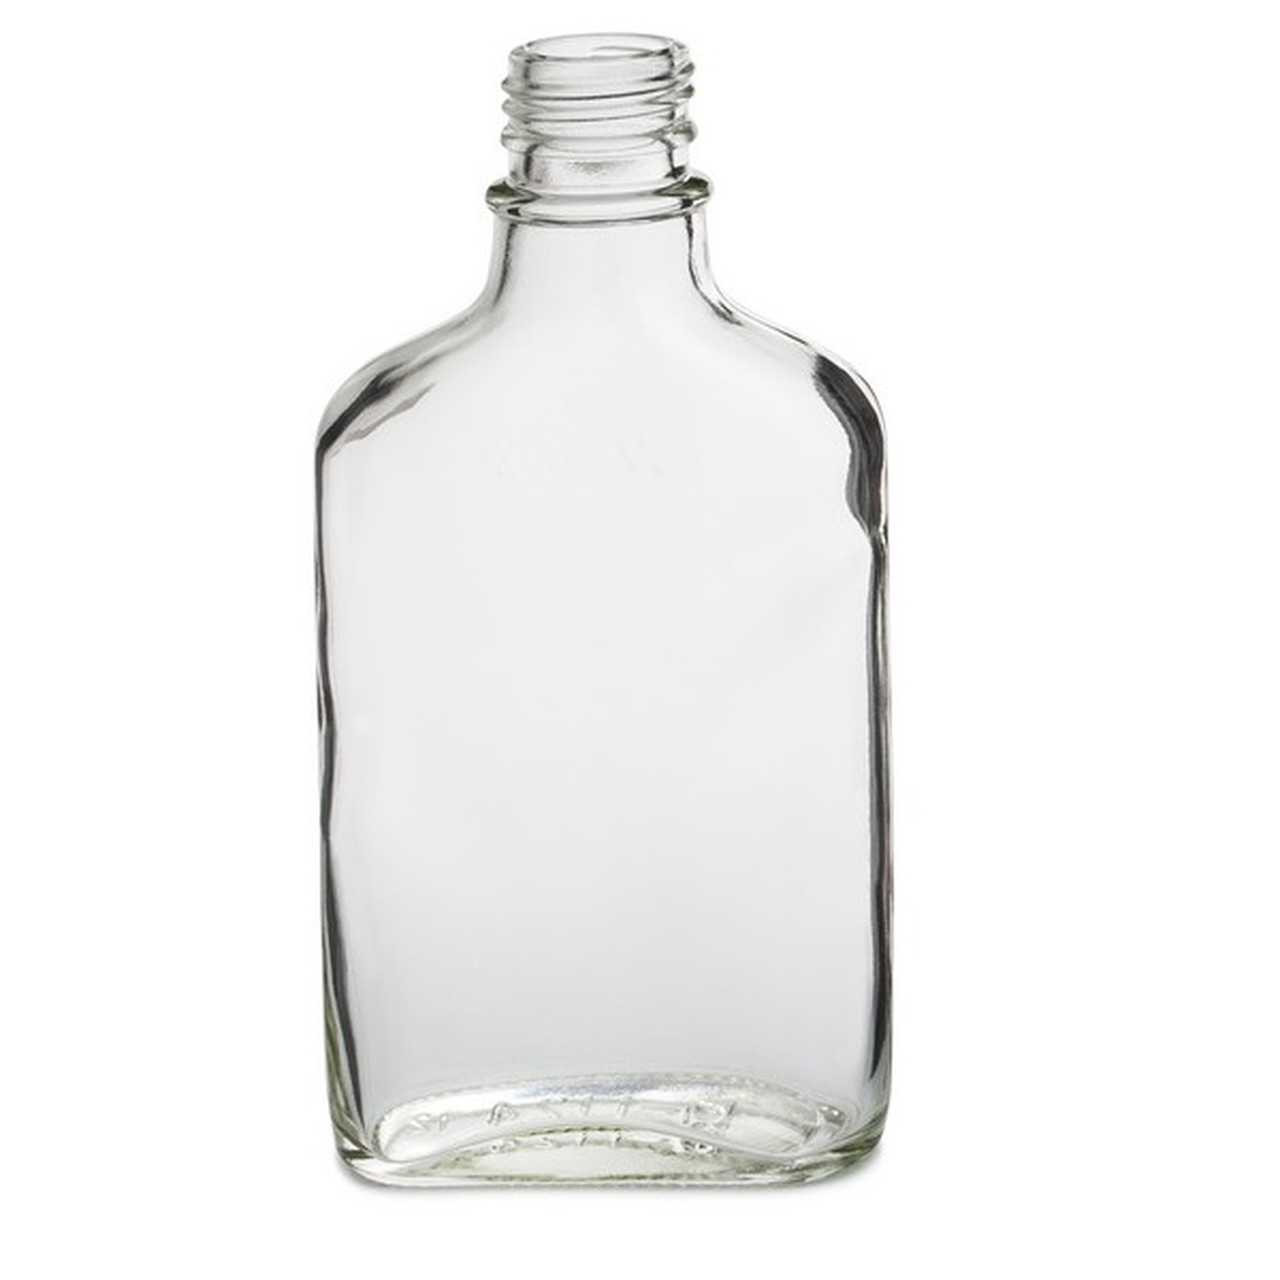 https://cdn11.bigcommerce.com/s-1ybtx/images/stencil/1280x1280/products/1225/6574/200-ml-Flask-Glass-Bottle-with-Tamper-Evident-Cap_3949__48365.1699988983.jpg?c=2?imbypass=on